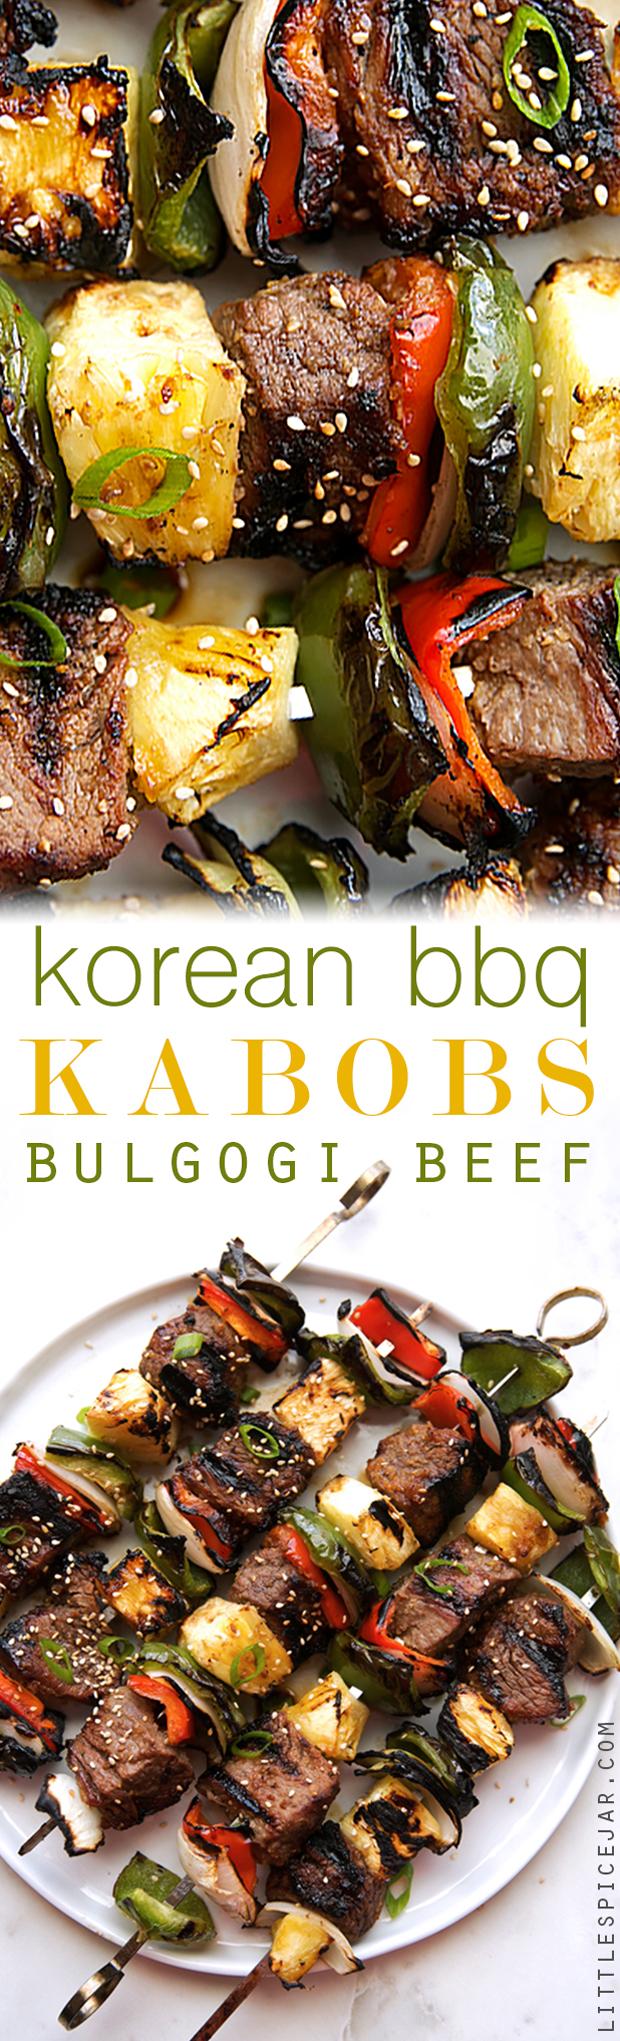 Korean Beef Kabobs (Bulgogi) An easy recipe to make when entertaining or for summertime grilling! Just marinade the meat and make the skewers! So EASY and SOOOOO delicious! #bulgogi #bulgogibeef #koreanbbq #koreanbeef #kabobs | Littlespicejar.com